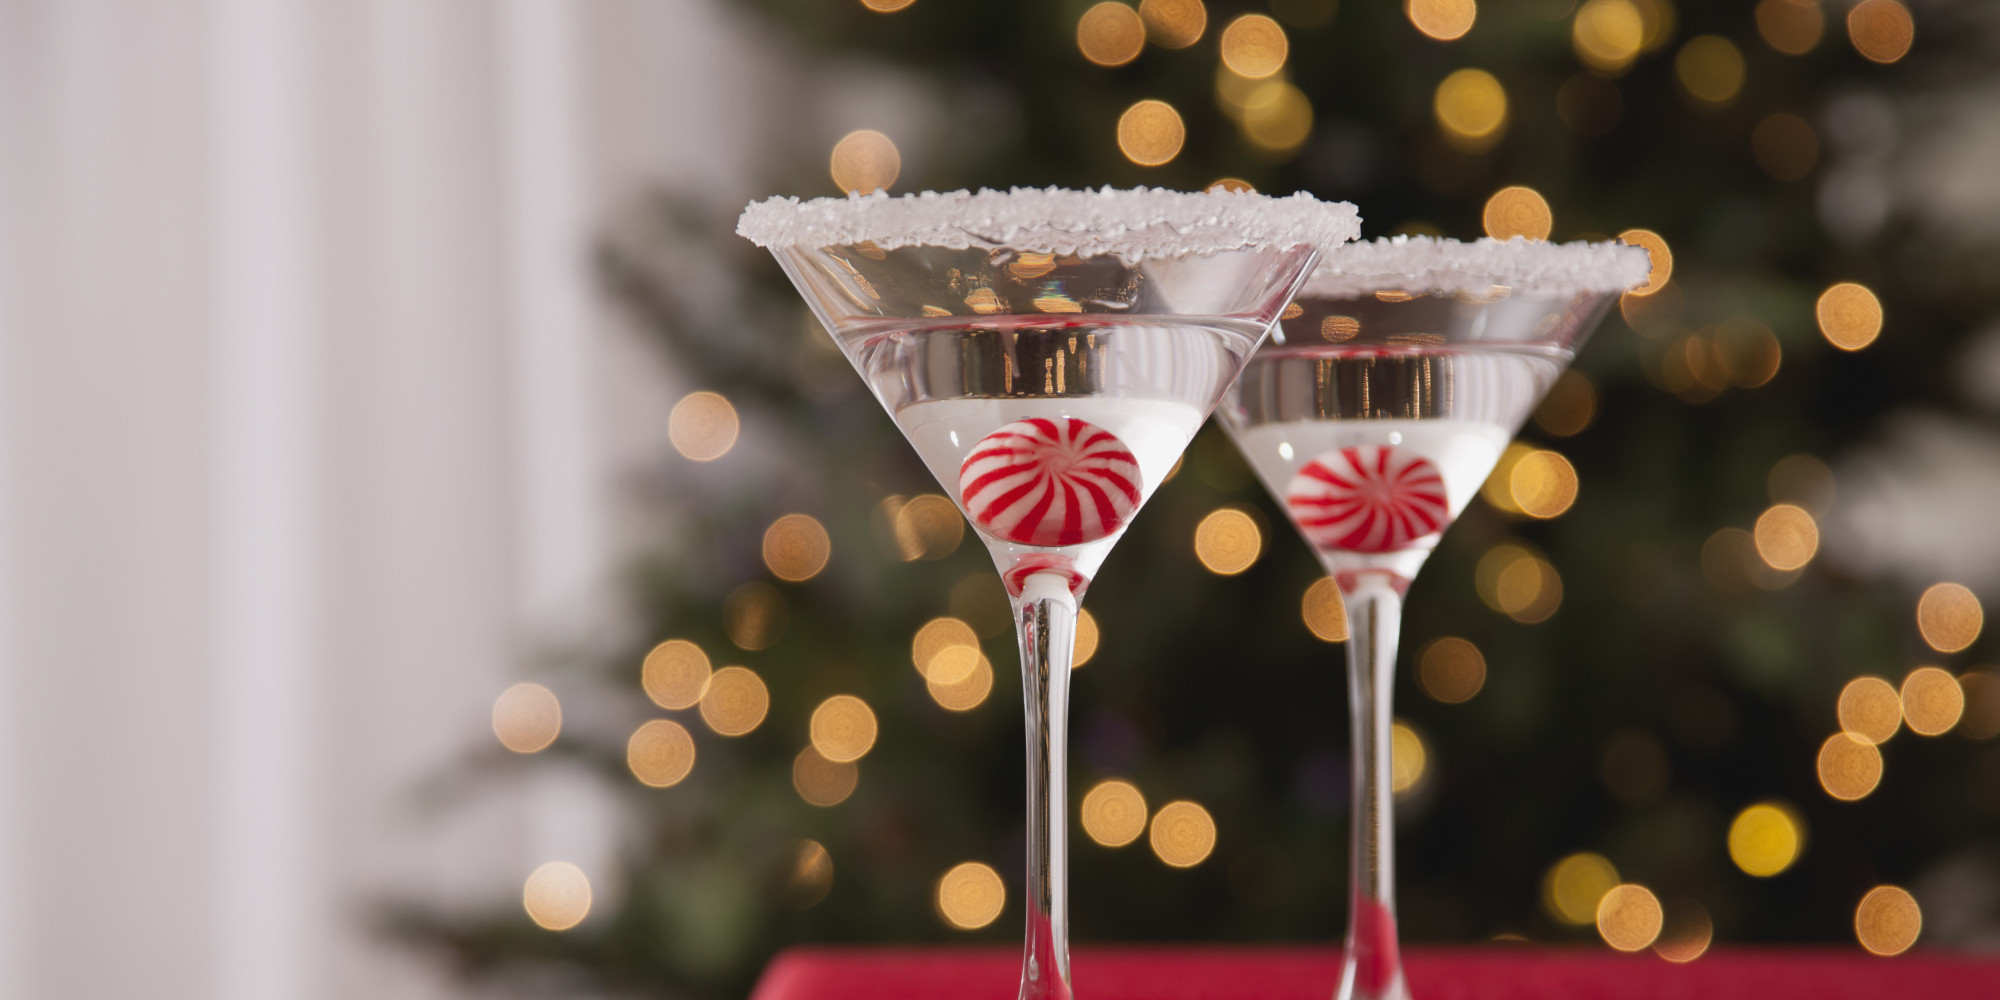 Christmas Cocktail Party Ideas
 Hosting a Christmas Cocktail Party